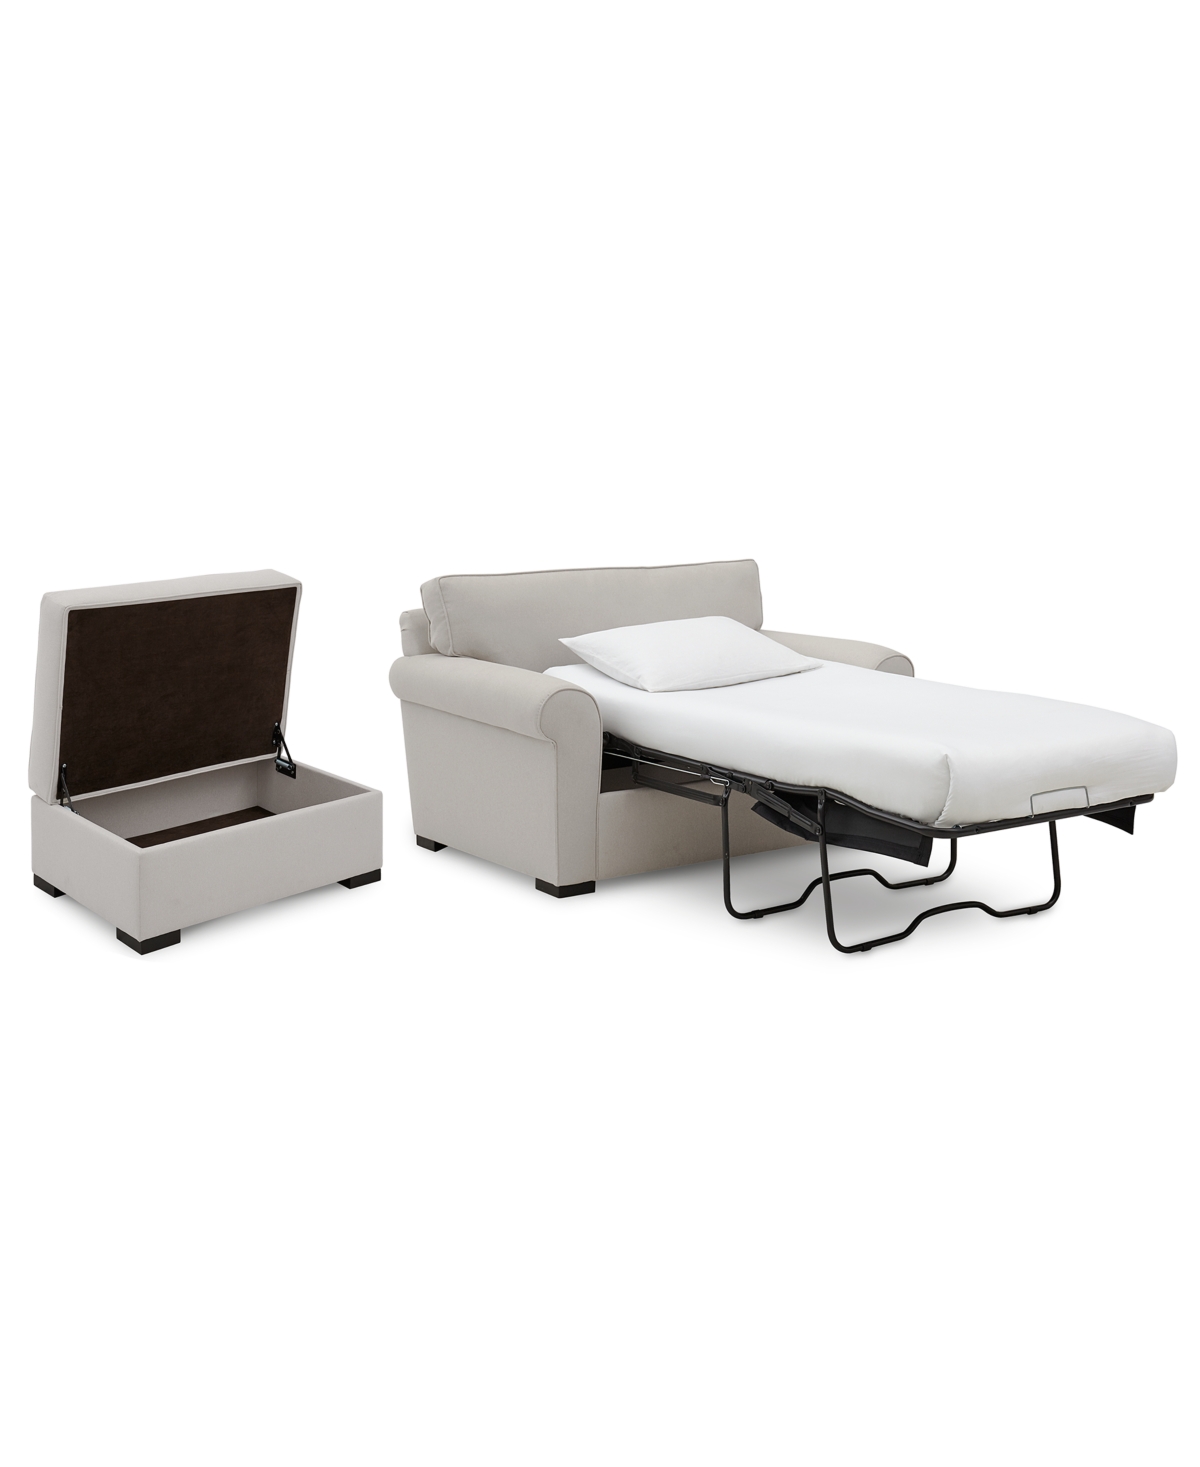 Astra 59 Fabric Chair Bed & 36 Fabric Storage Ottoman Set, Created for Macys